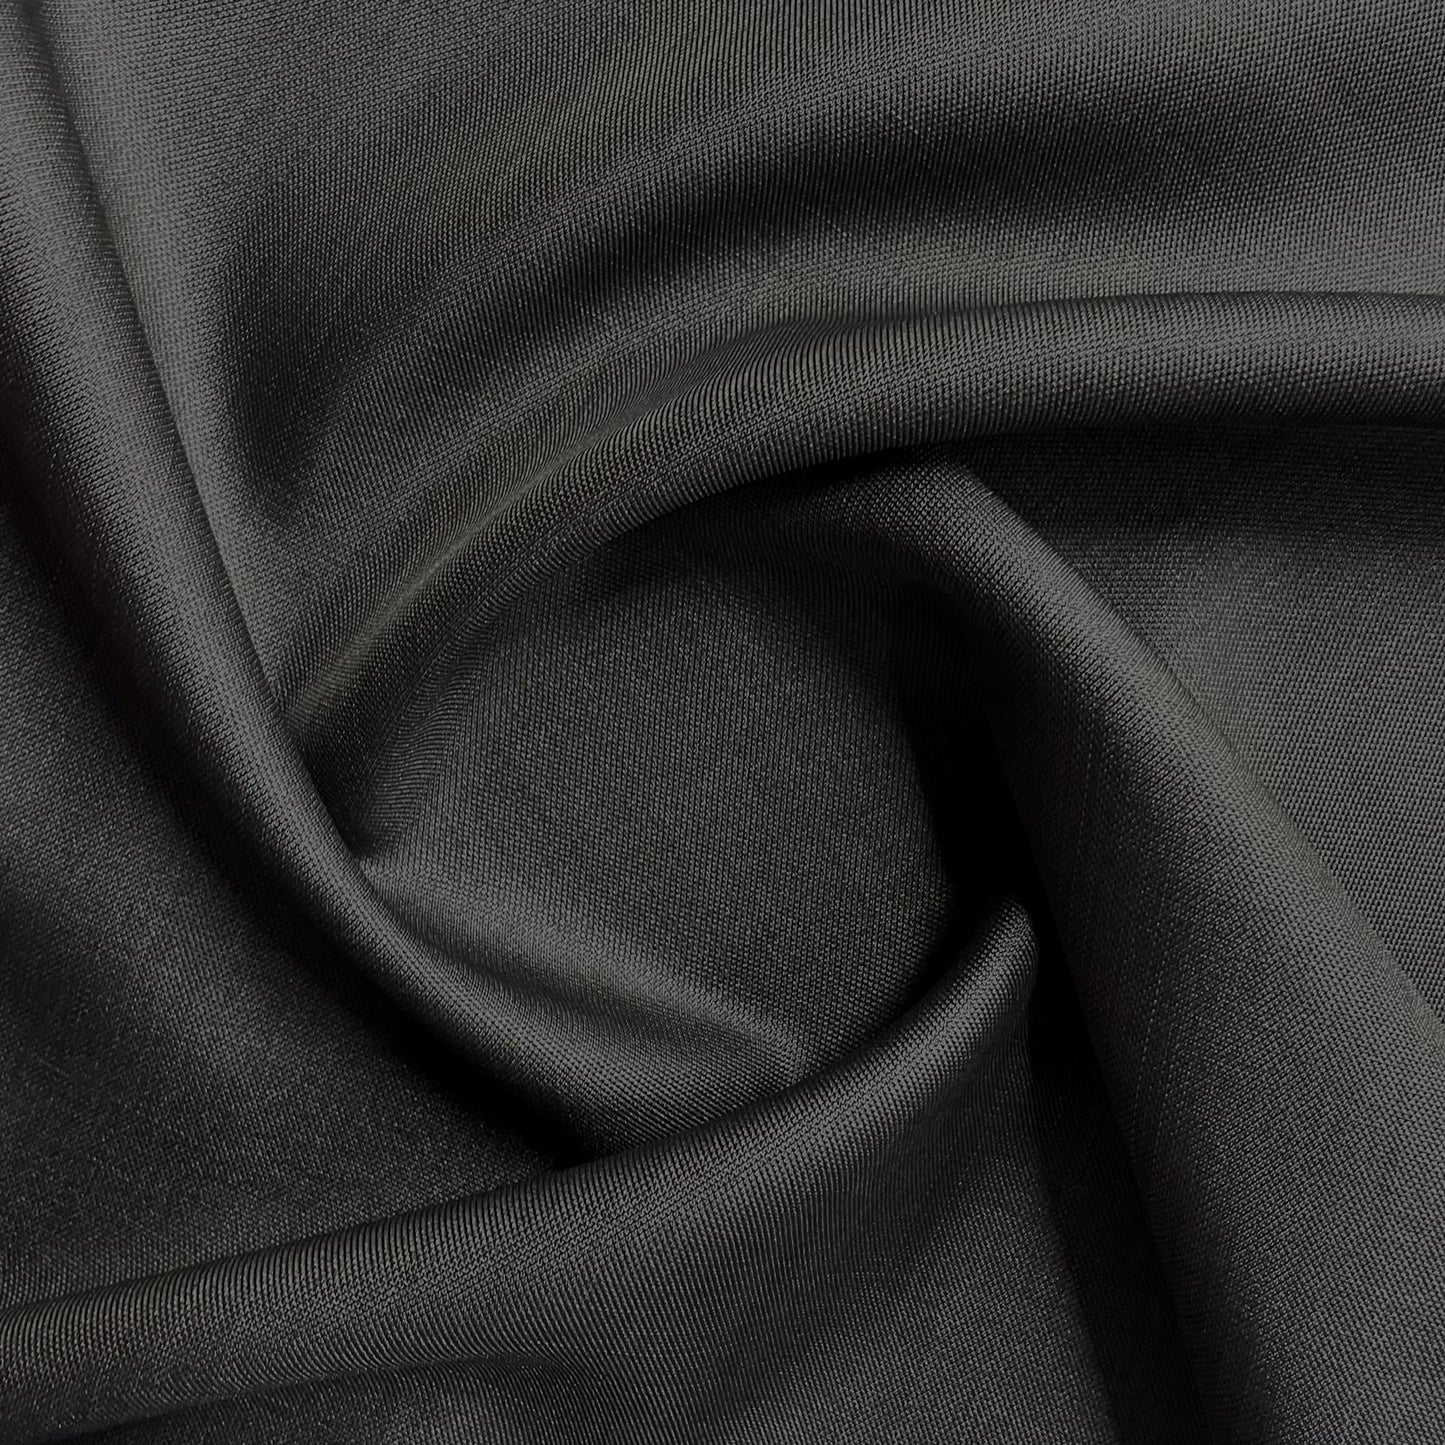 Black Solid Viscose Suiting Fabric